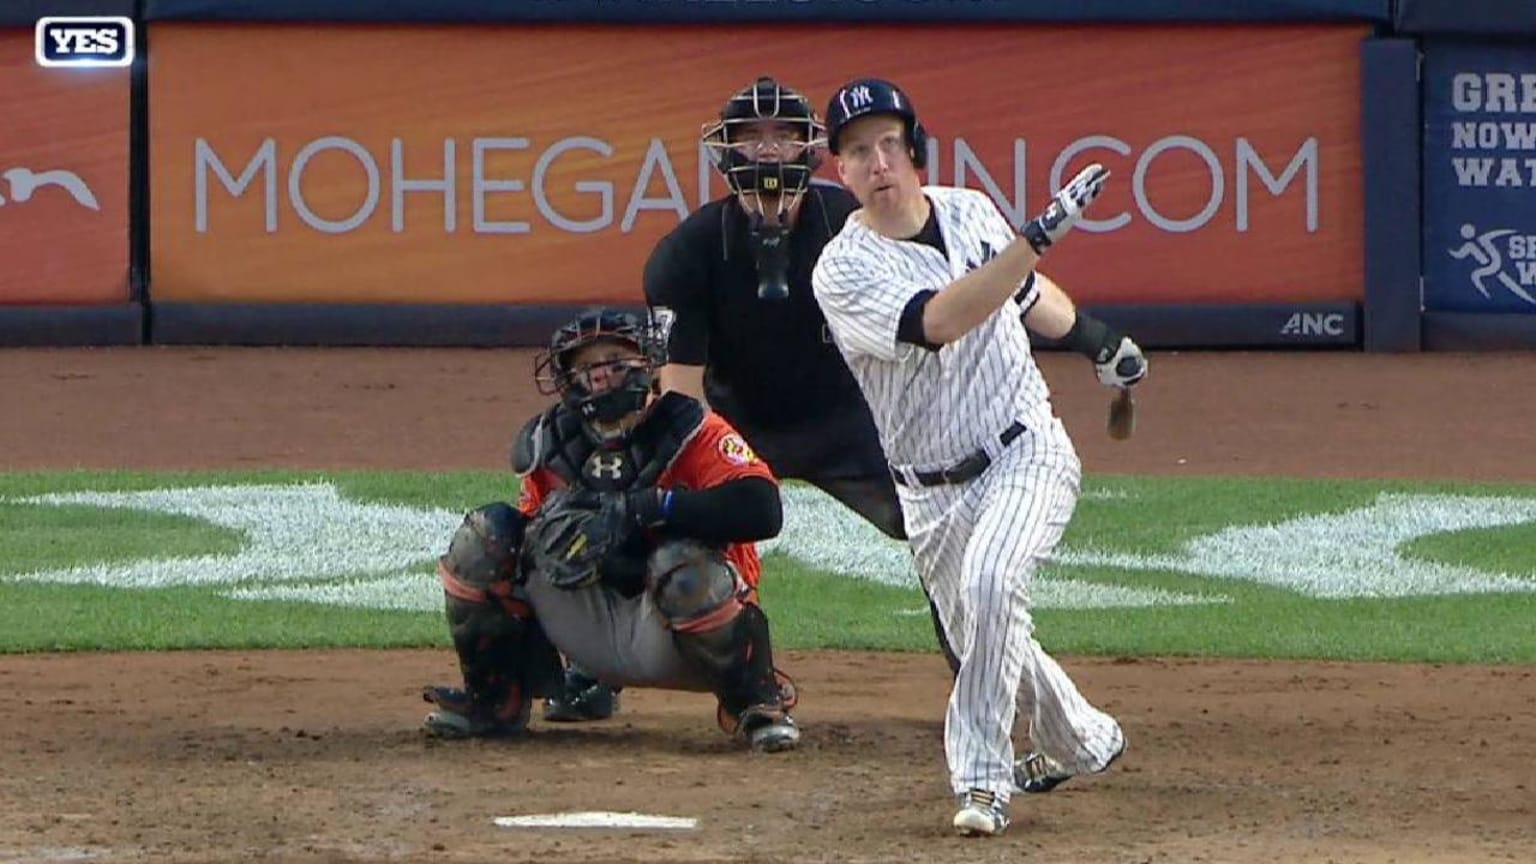 Todd Frazier's 4 hits, including a solo HR, help U.S. qualify for